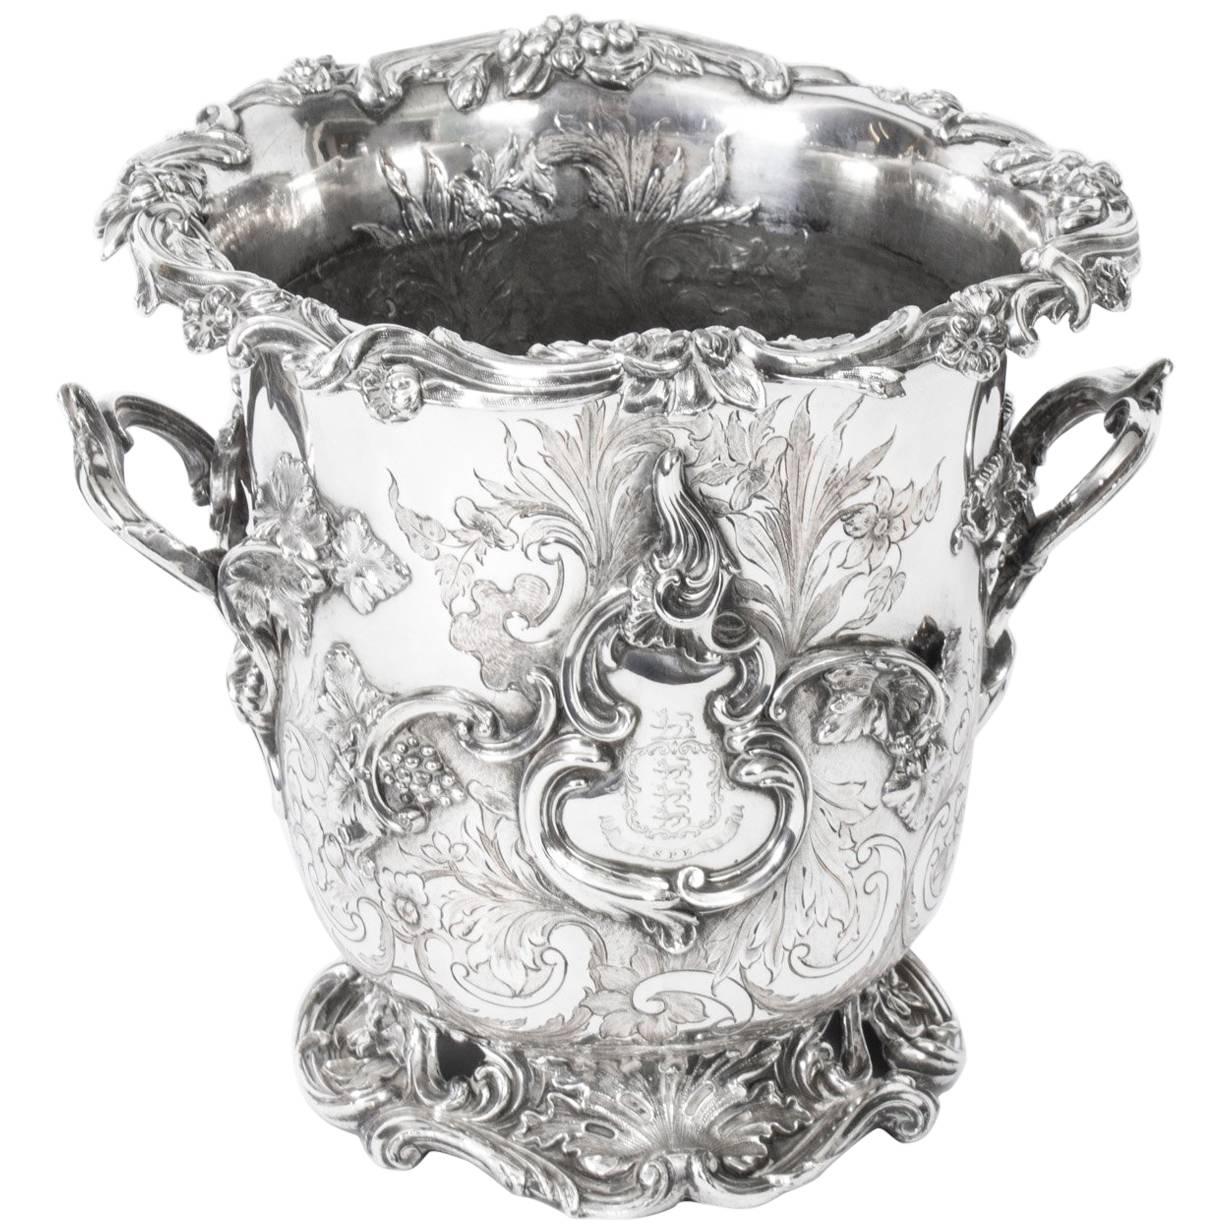 Antique Old Sheffield Embossed Wine Cooler, circa 1830